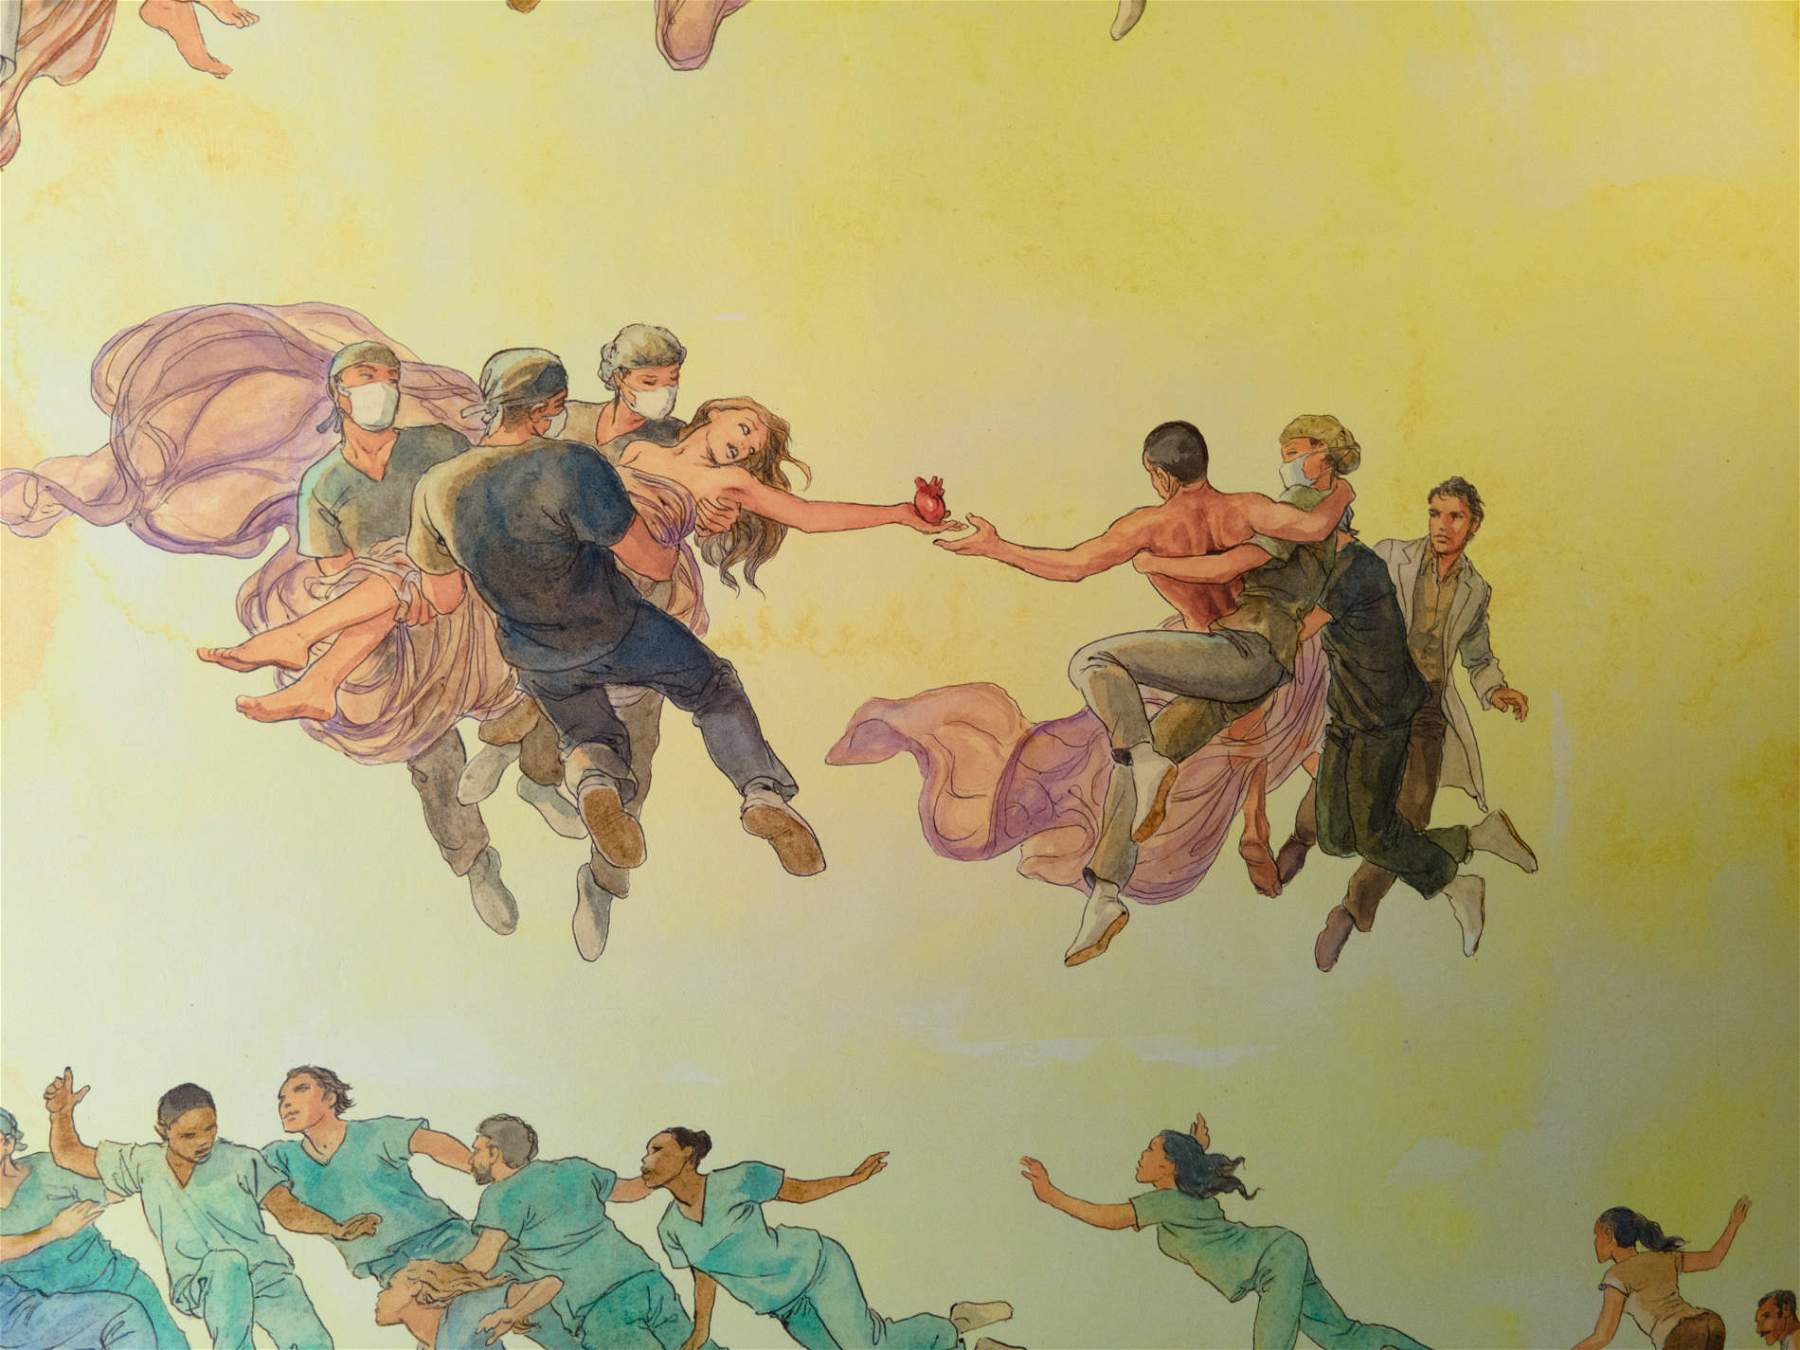 Padua, a mural by Milo Manara for the 100th anniversary of the Institute of Human Anatomy 